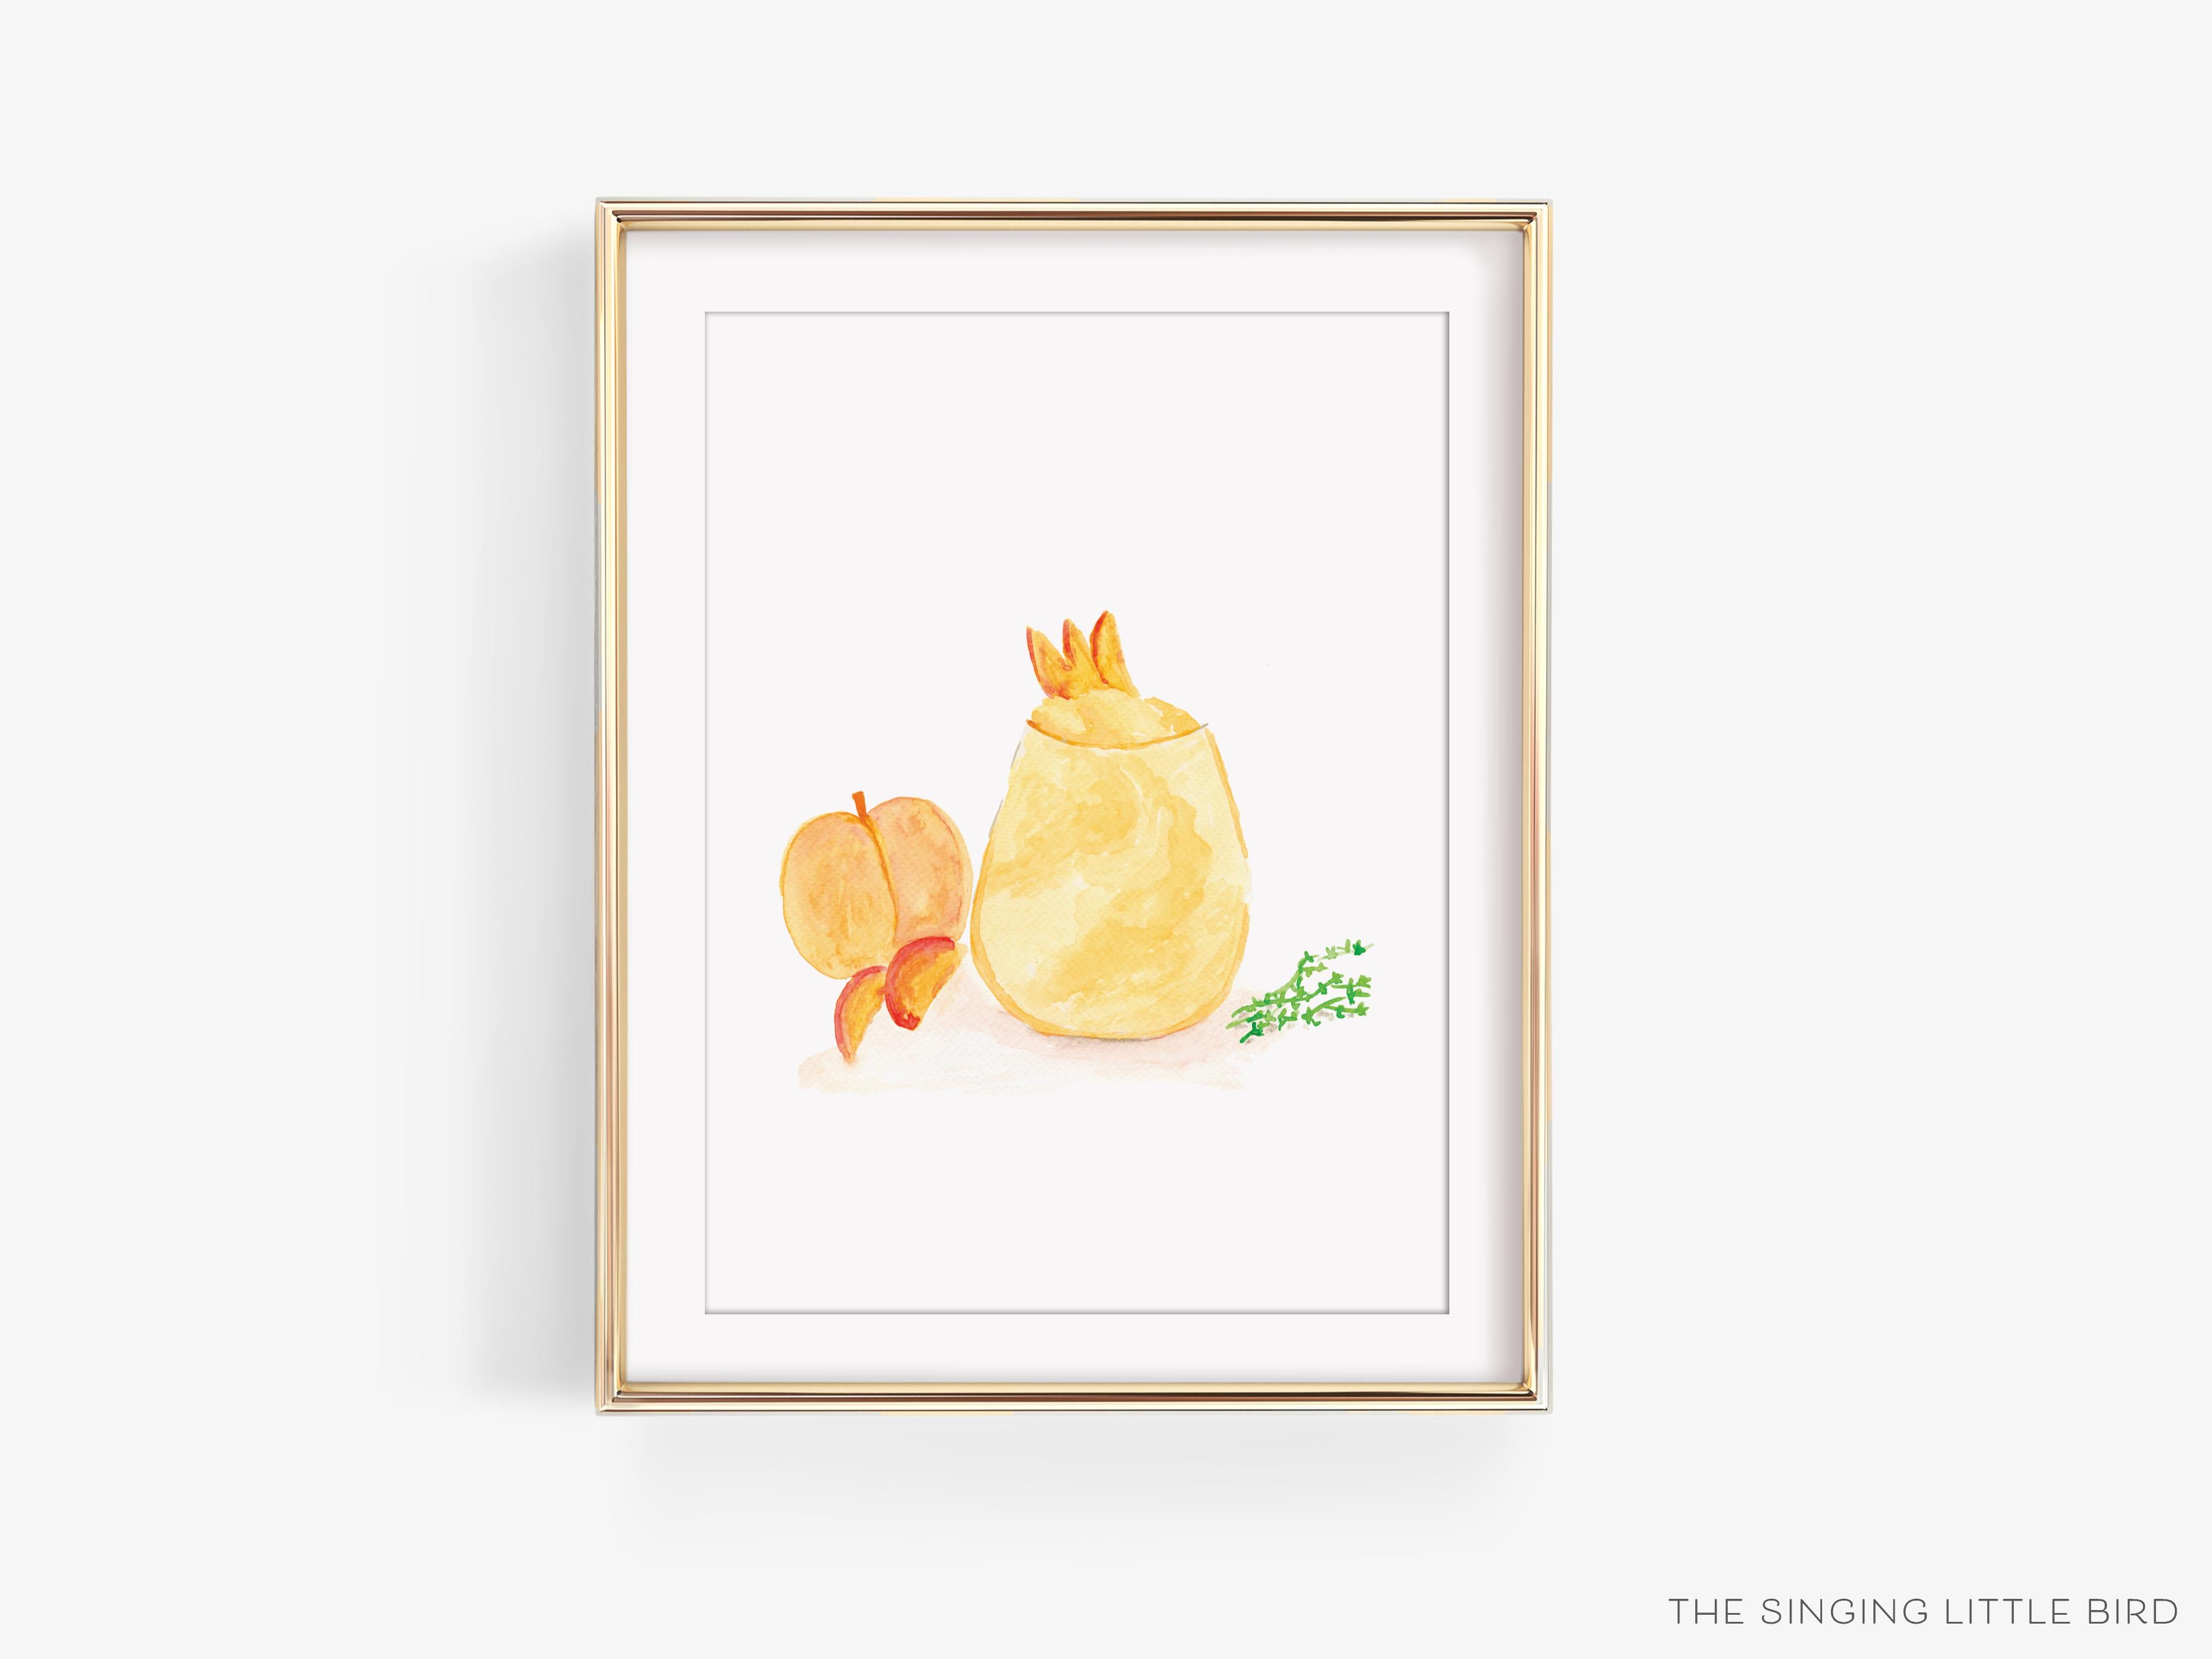 Peach Bellini Cocktail Art Print-This watercolor art print features our hand-painted peach and cocktail glass, printed in the USA on 120lb high quality art paper. This makes a great gift or wall decor for the cocktail lover in your life.-The Singing Little Bird